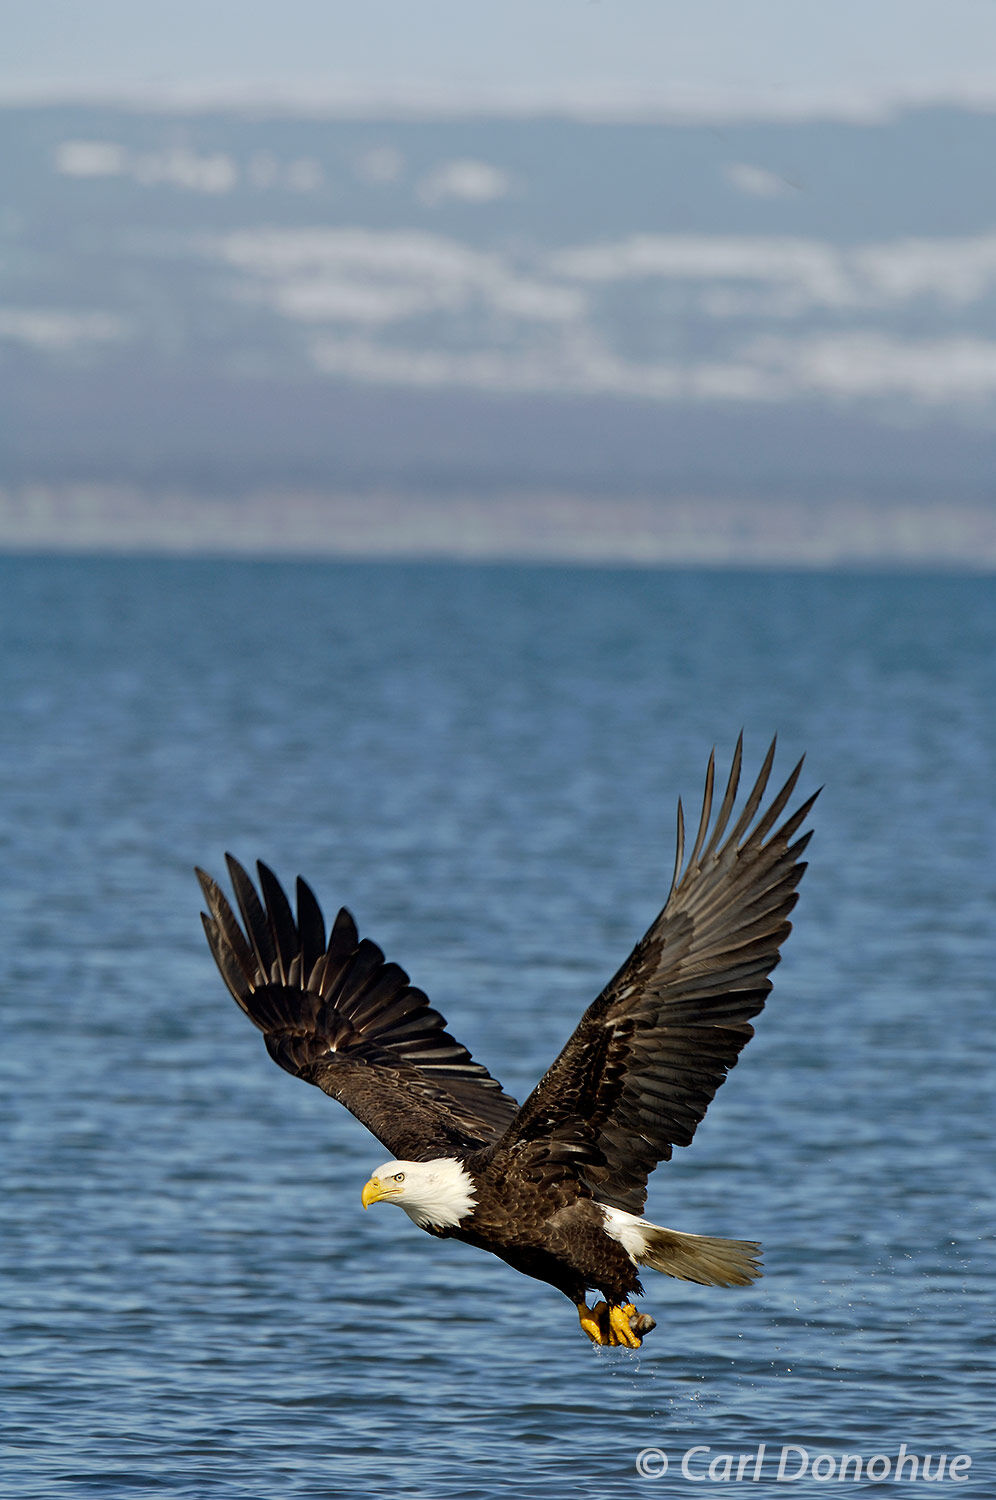 The bald eagle's wings beat steadily as it soars above Kachemak Bay, searching for fish swimming below. Bald eagle fishing in...